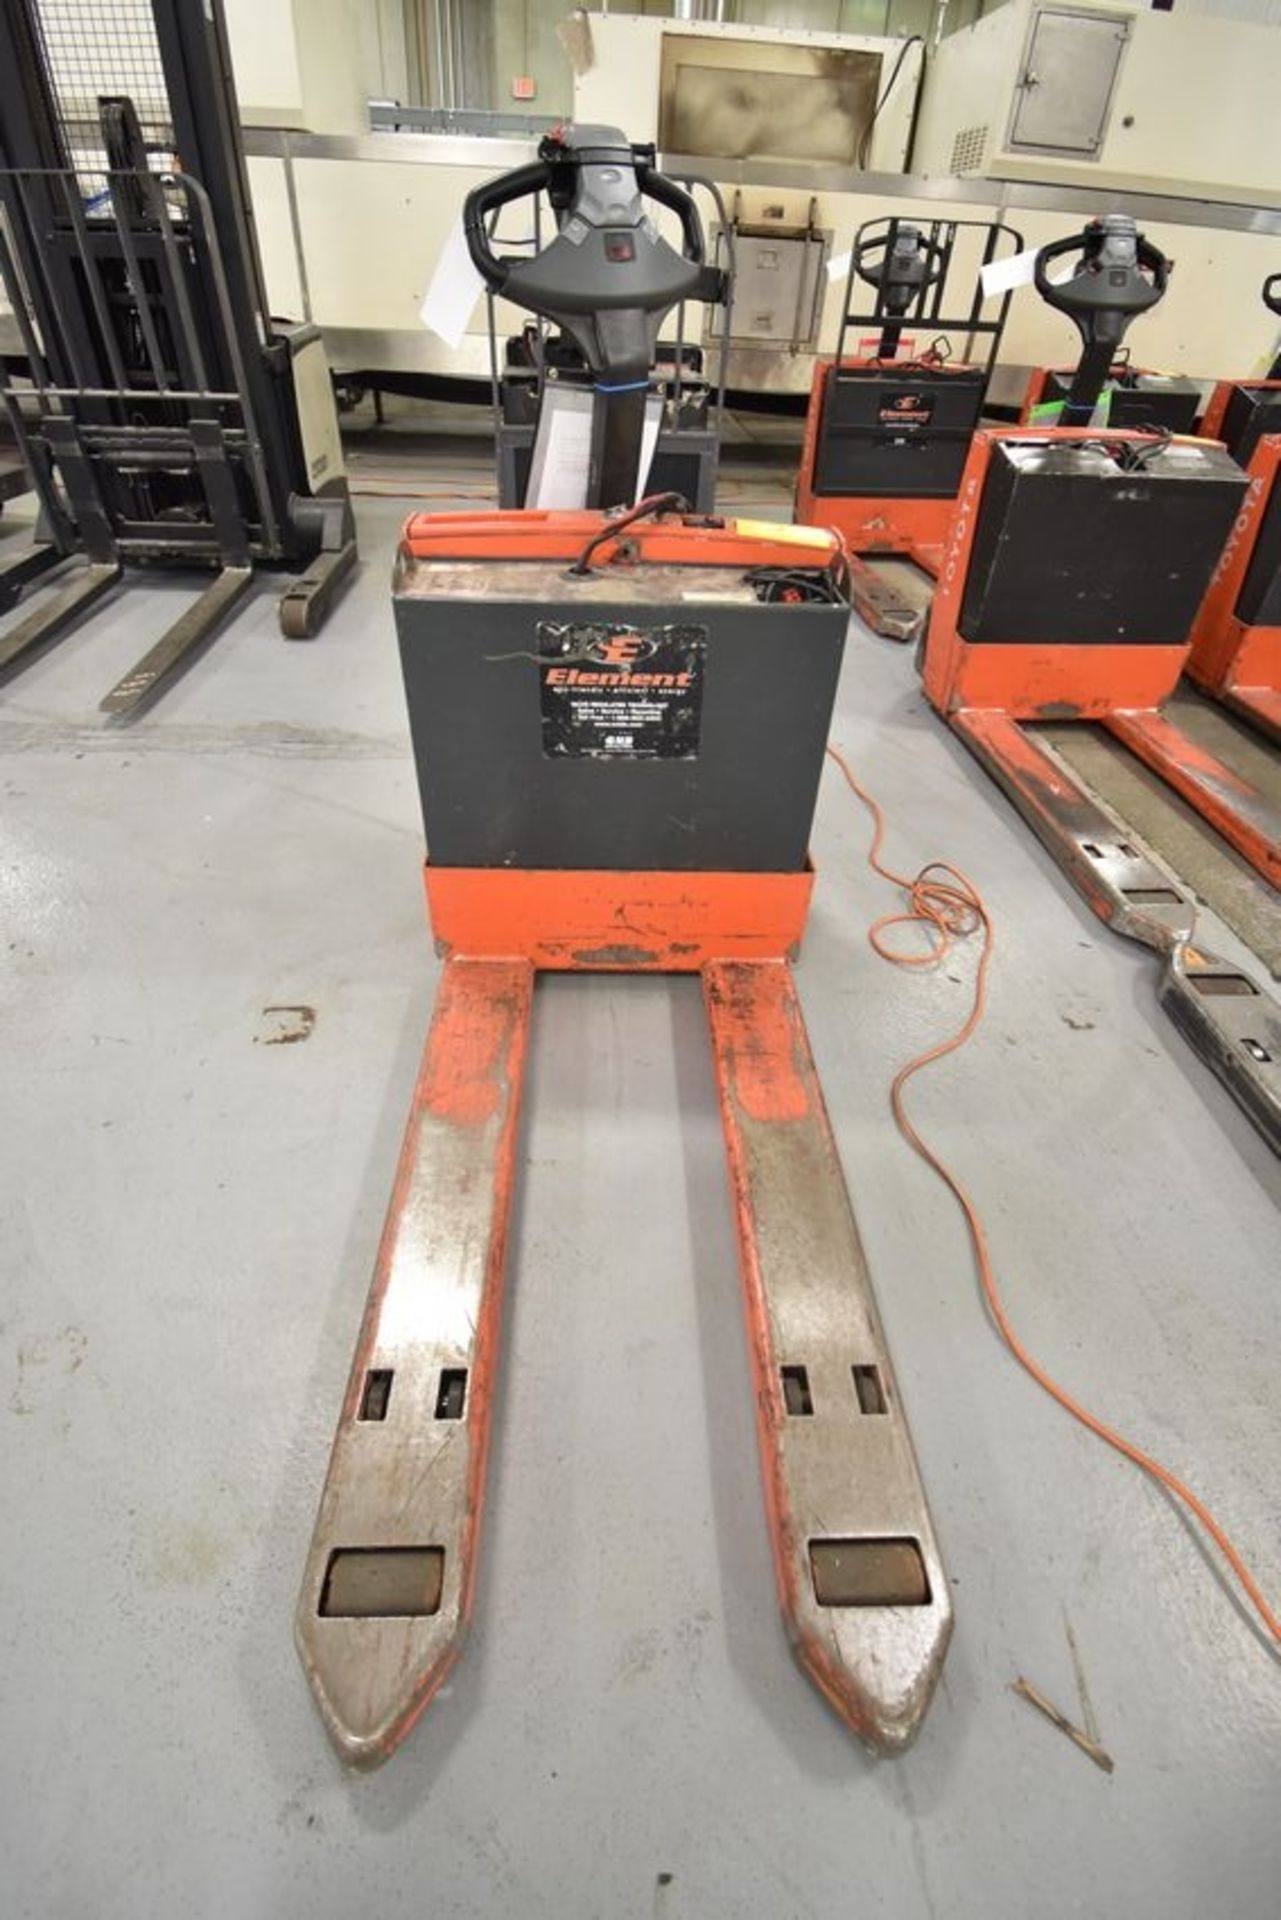 Toyota | Toyota Electric Pallet Jack Model 7HBW23, S/N 7HBW23-52194. 4500 lbs capacity, 24 volt ( - Image 2 of 3